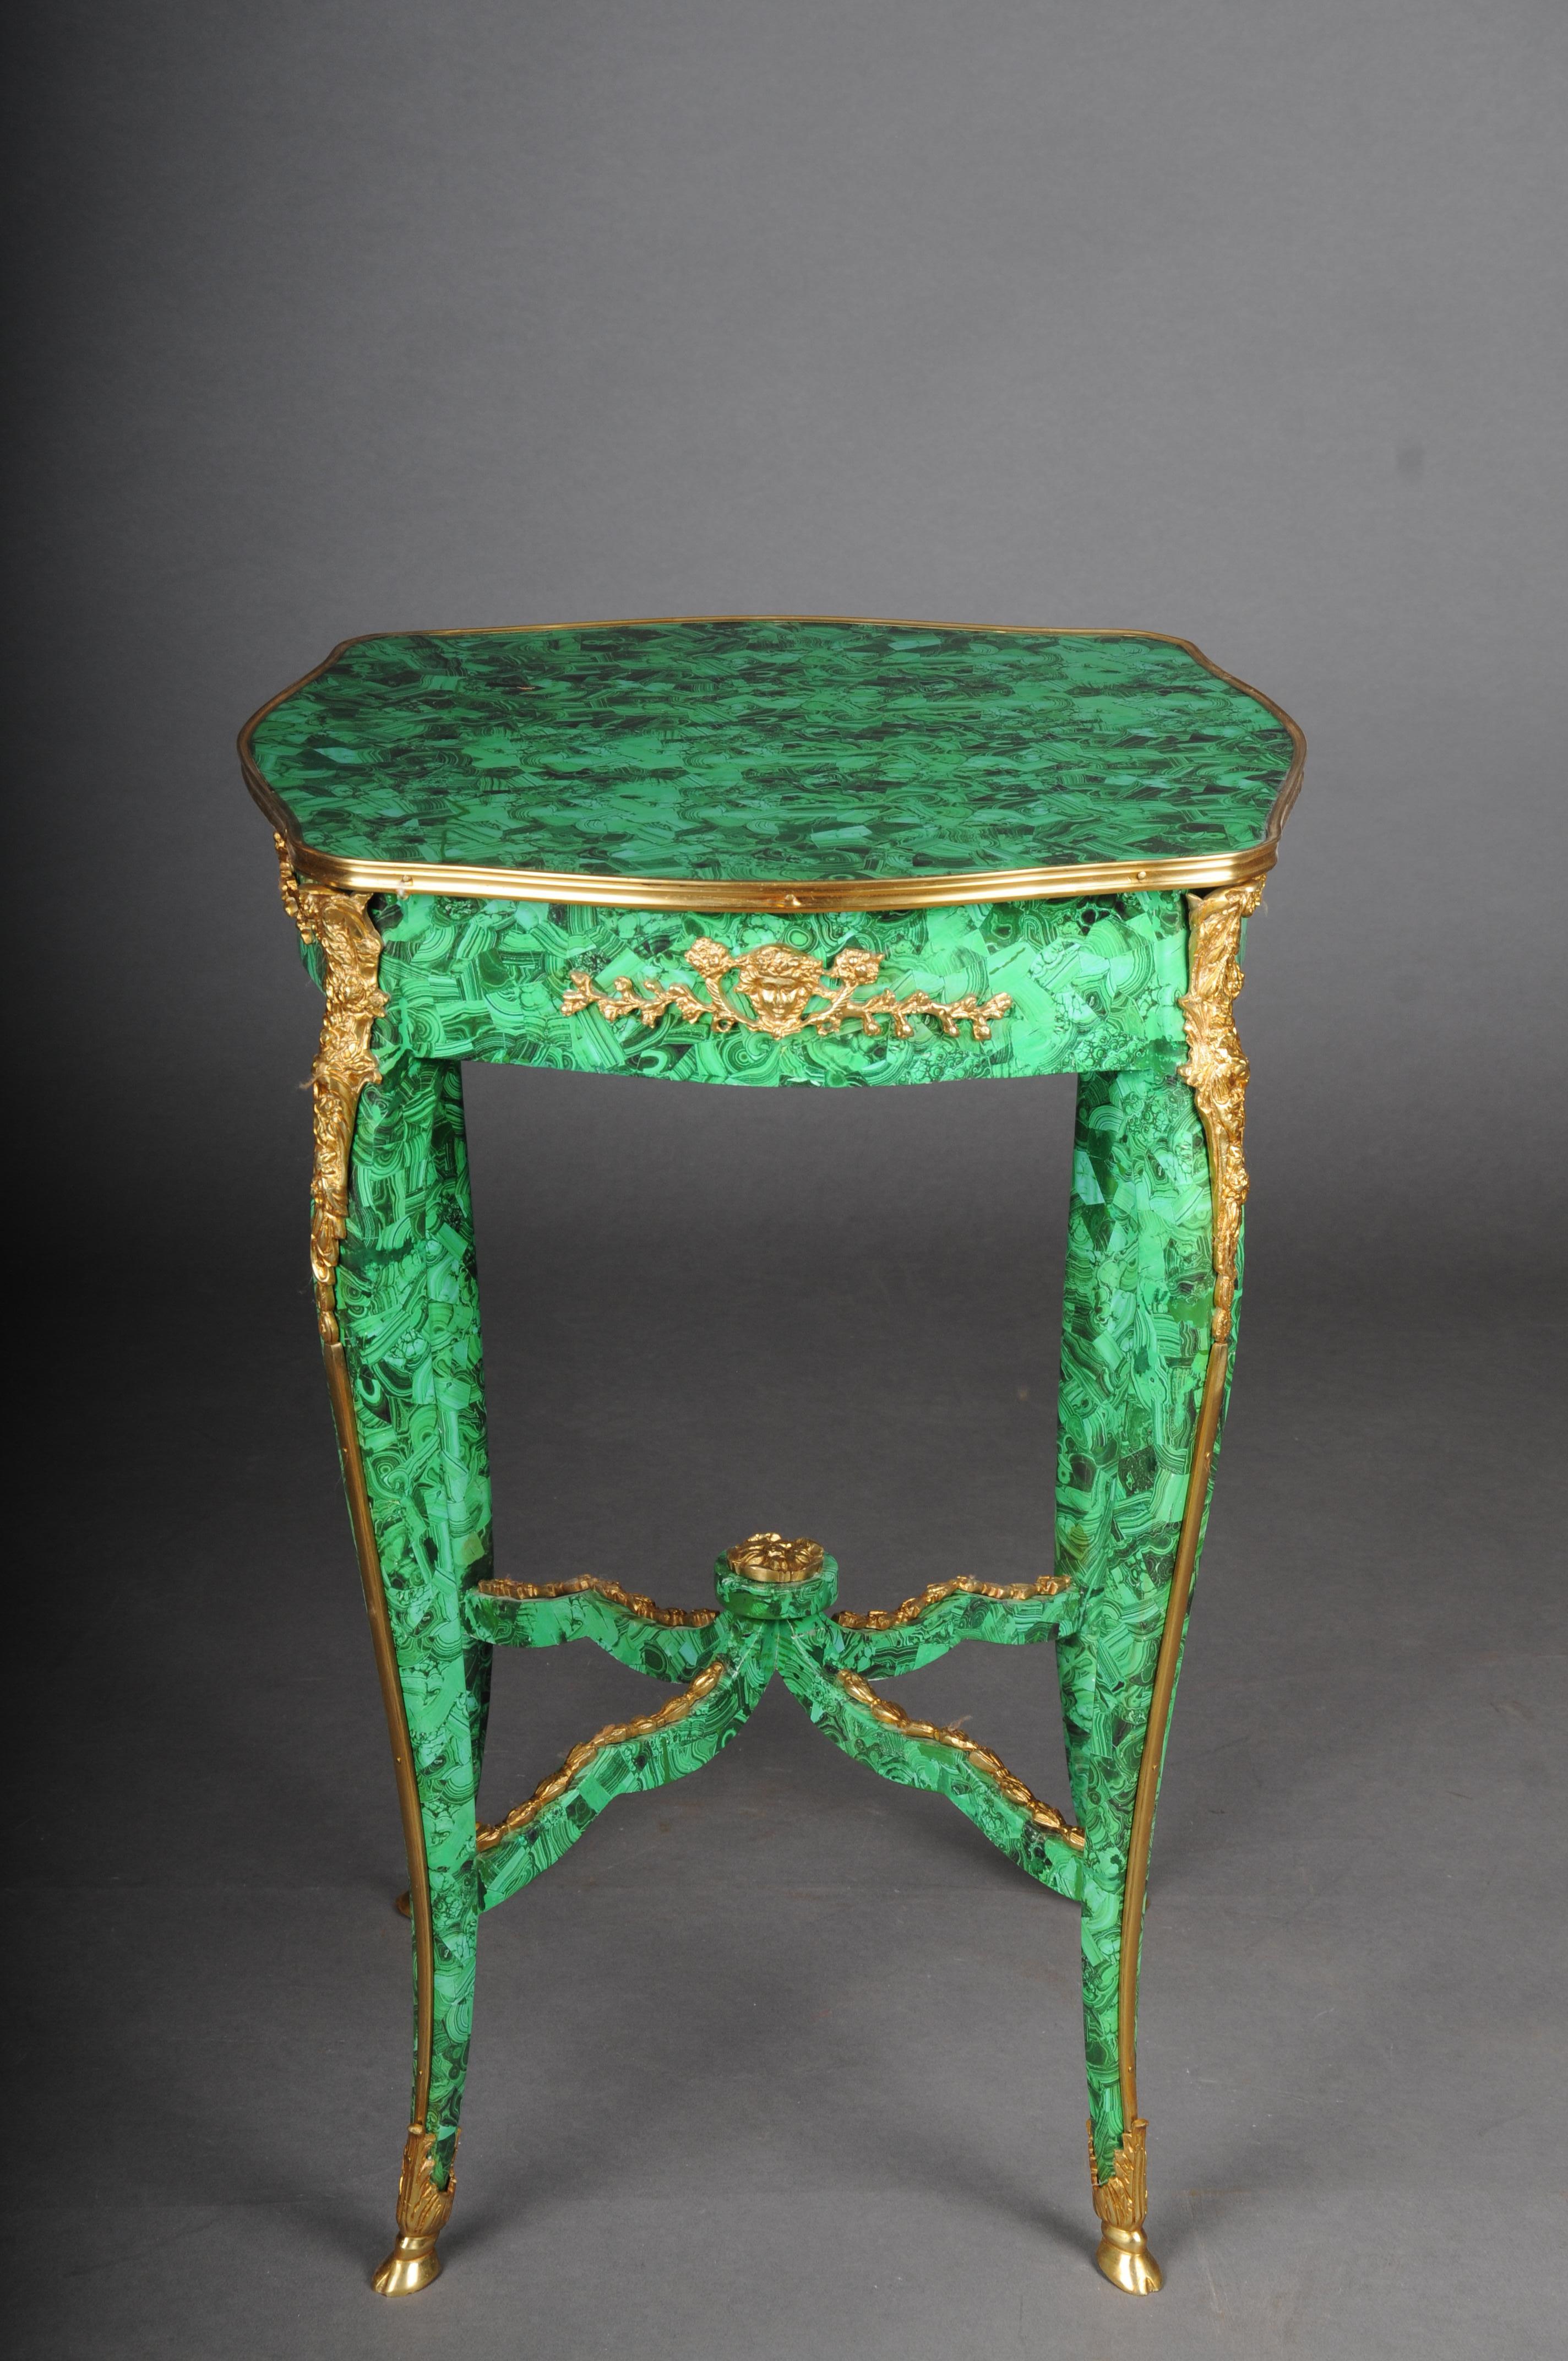 A Impressive malachite side table in the Louis XV.

Malachite look painted on solid beech wood. very decorative and elegant. Finely chased and gilded bronze fittings. Cover plate framed with brass. High slightly curved legs ending in sabots. Legs